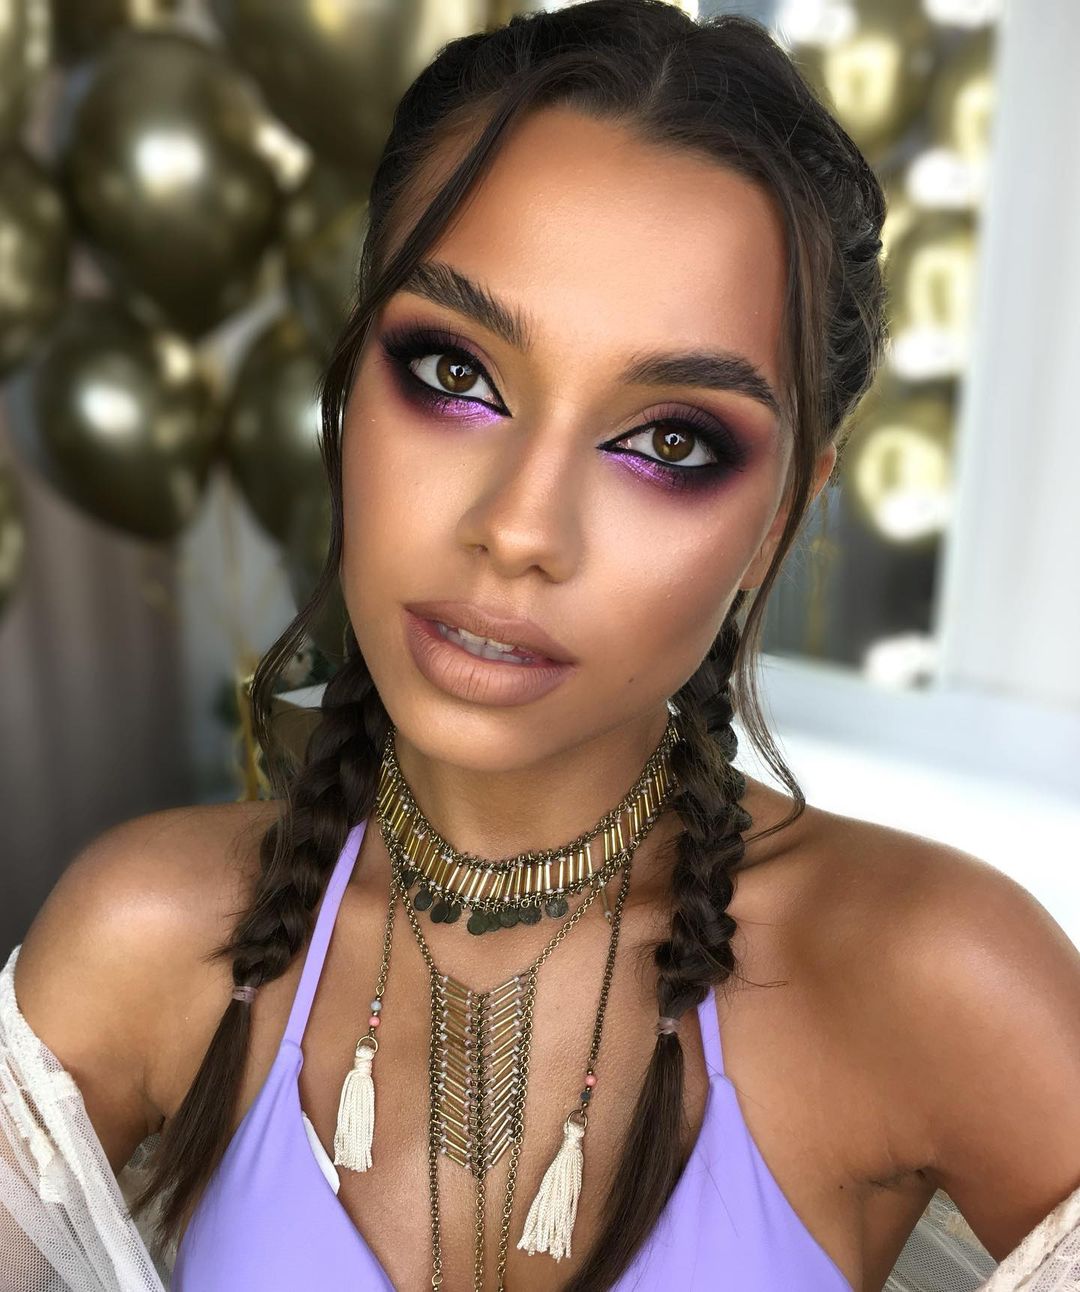 20 Boho Make-up Ideas That Are Worth Trying for All